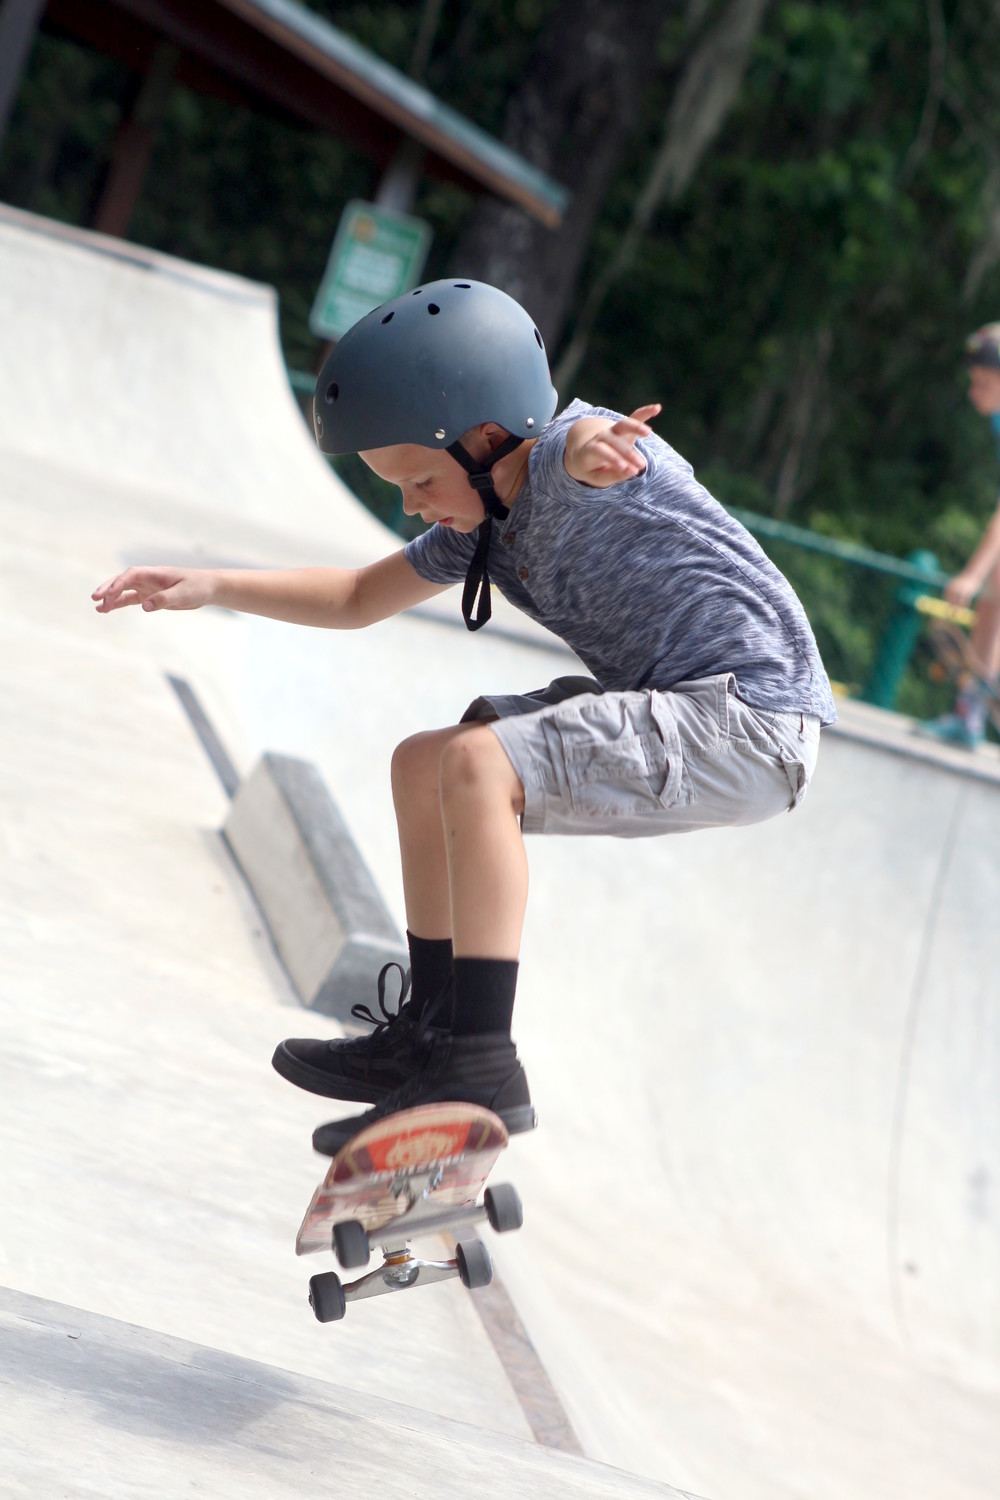 Nine year old Tyler Gold checked out a molly on the back side of the OP Skate Park course.